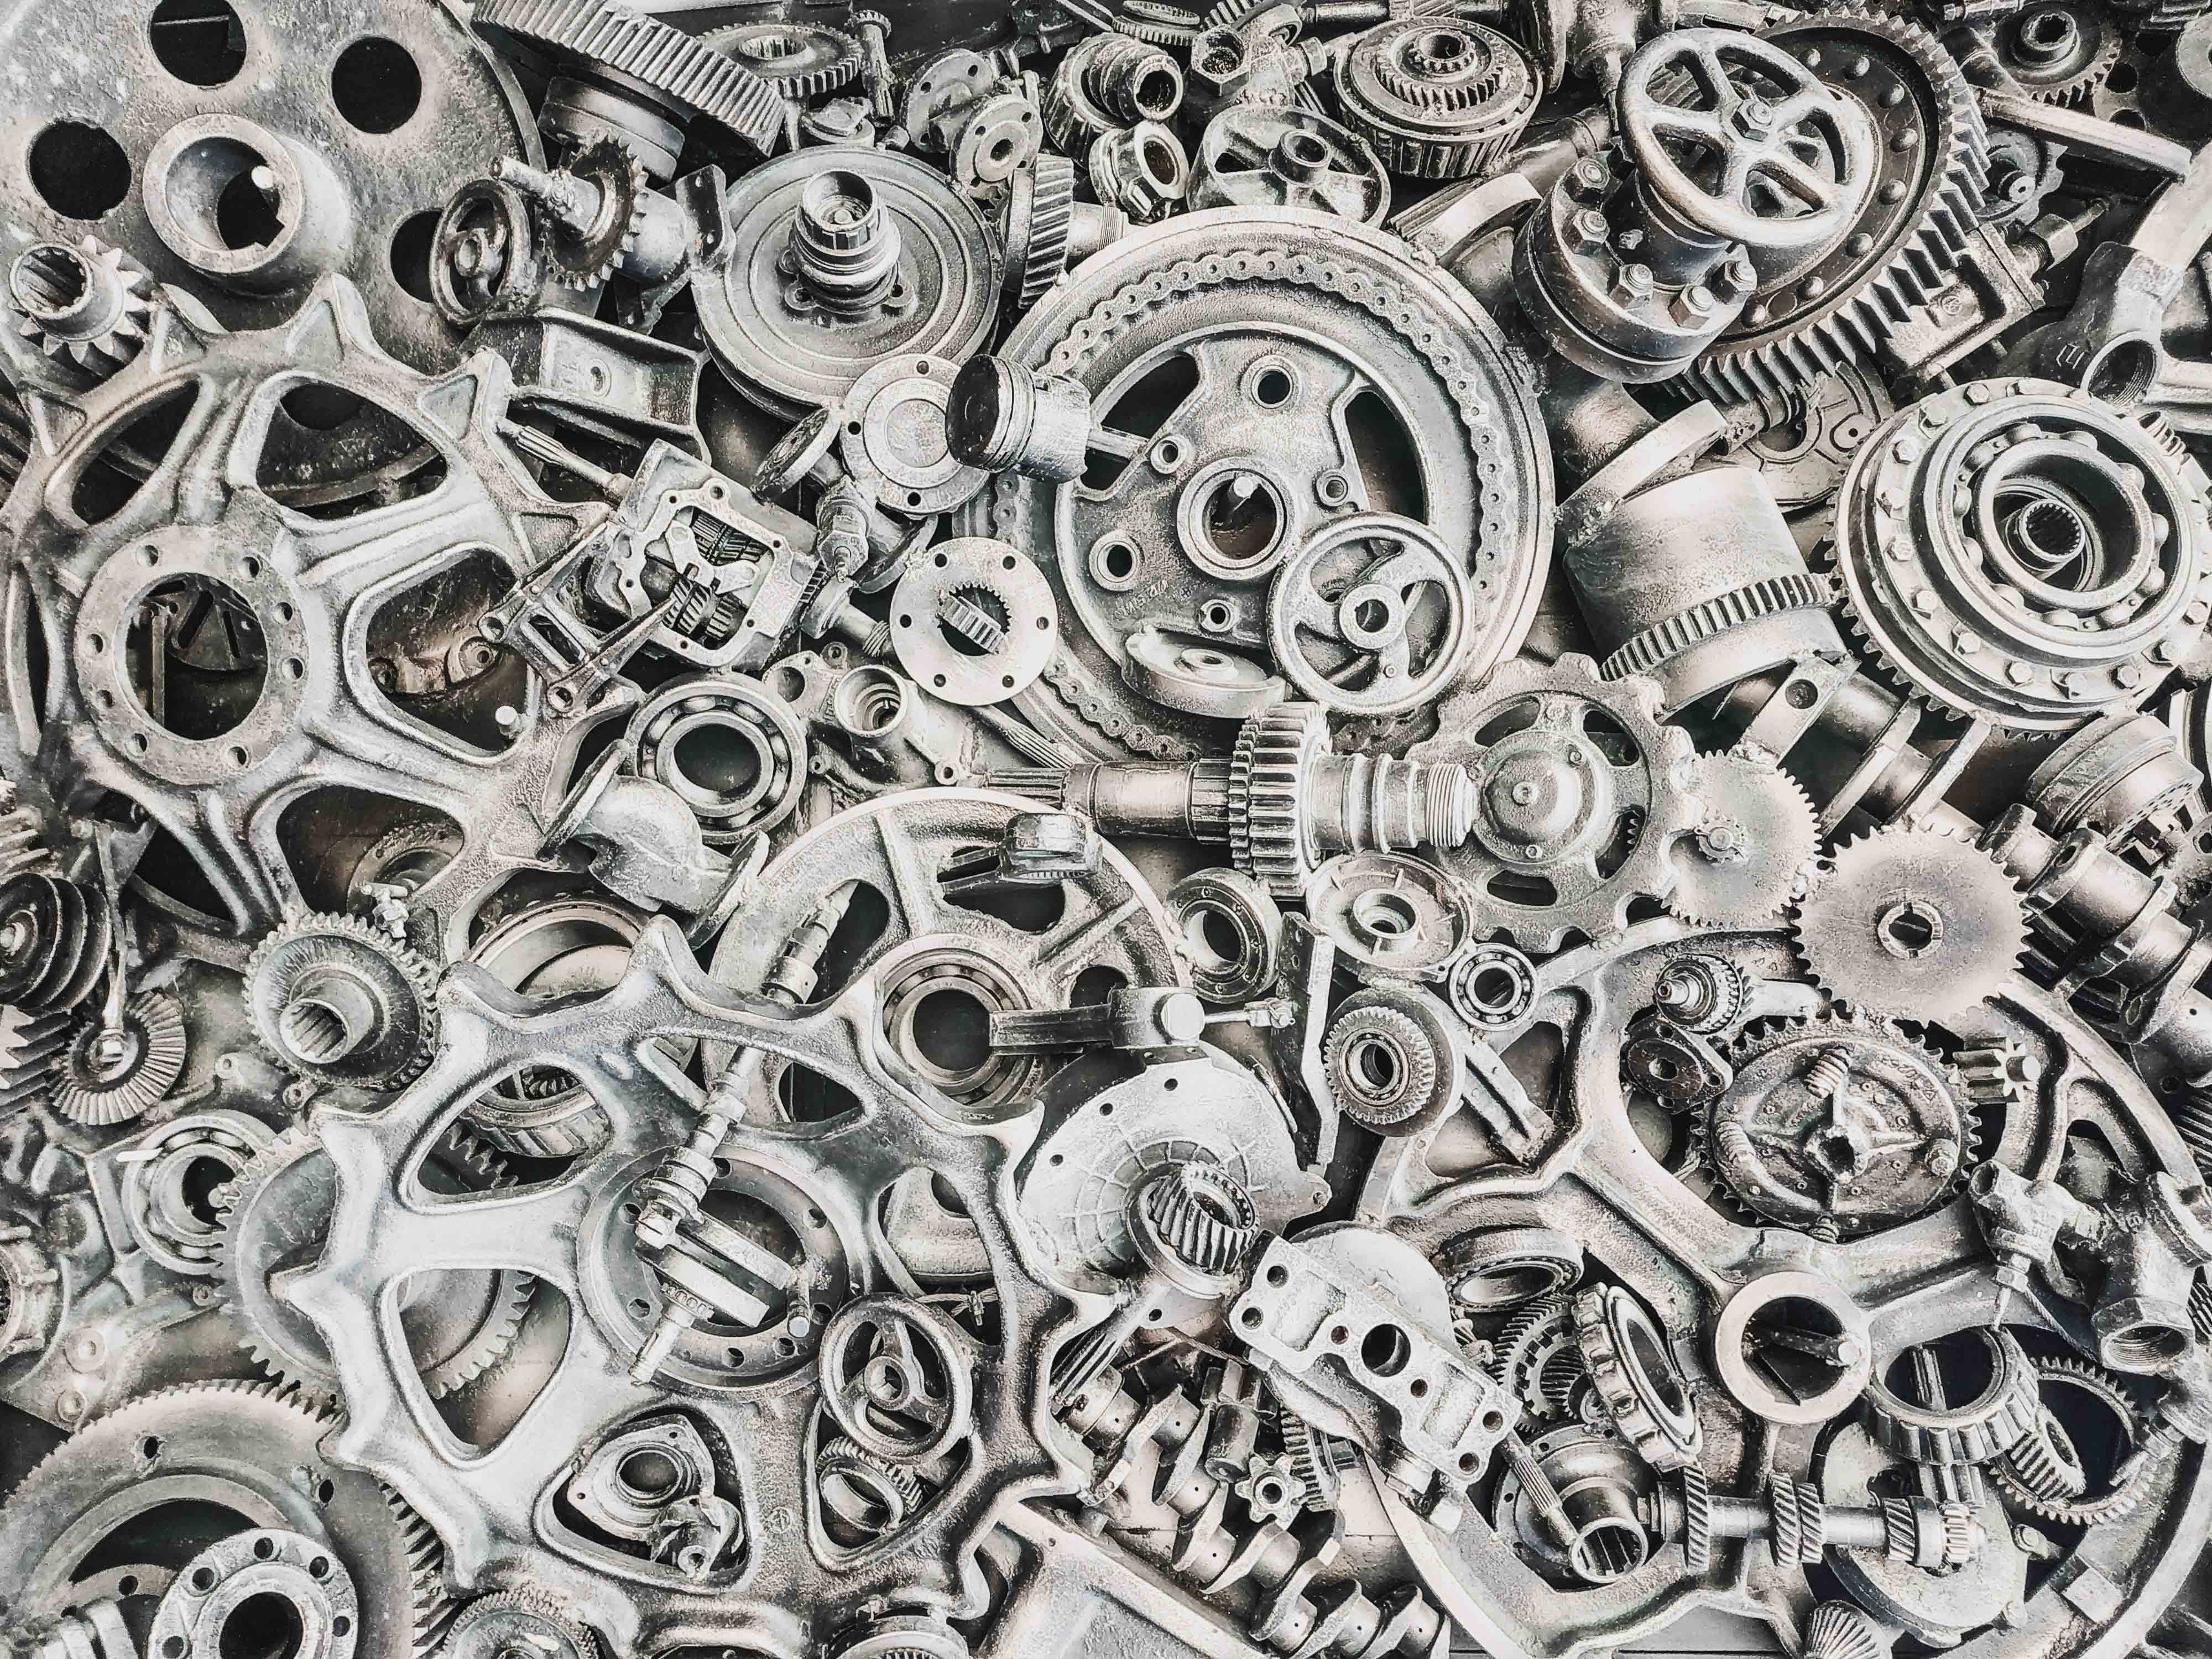 Pieces of gears